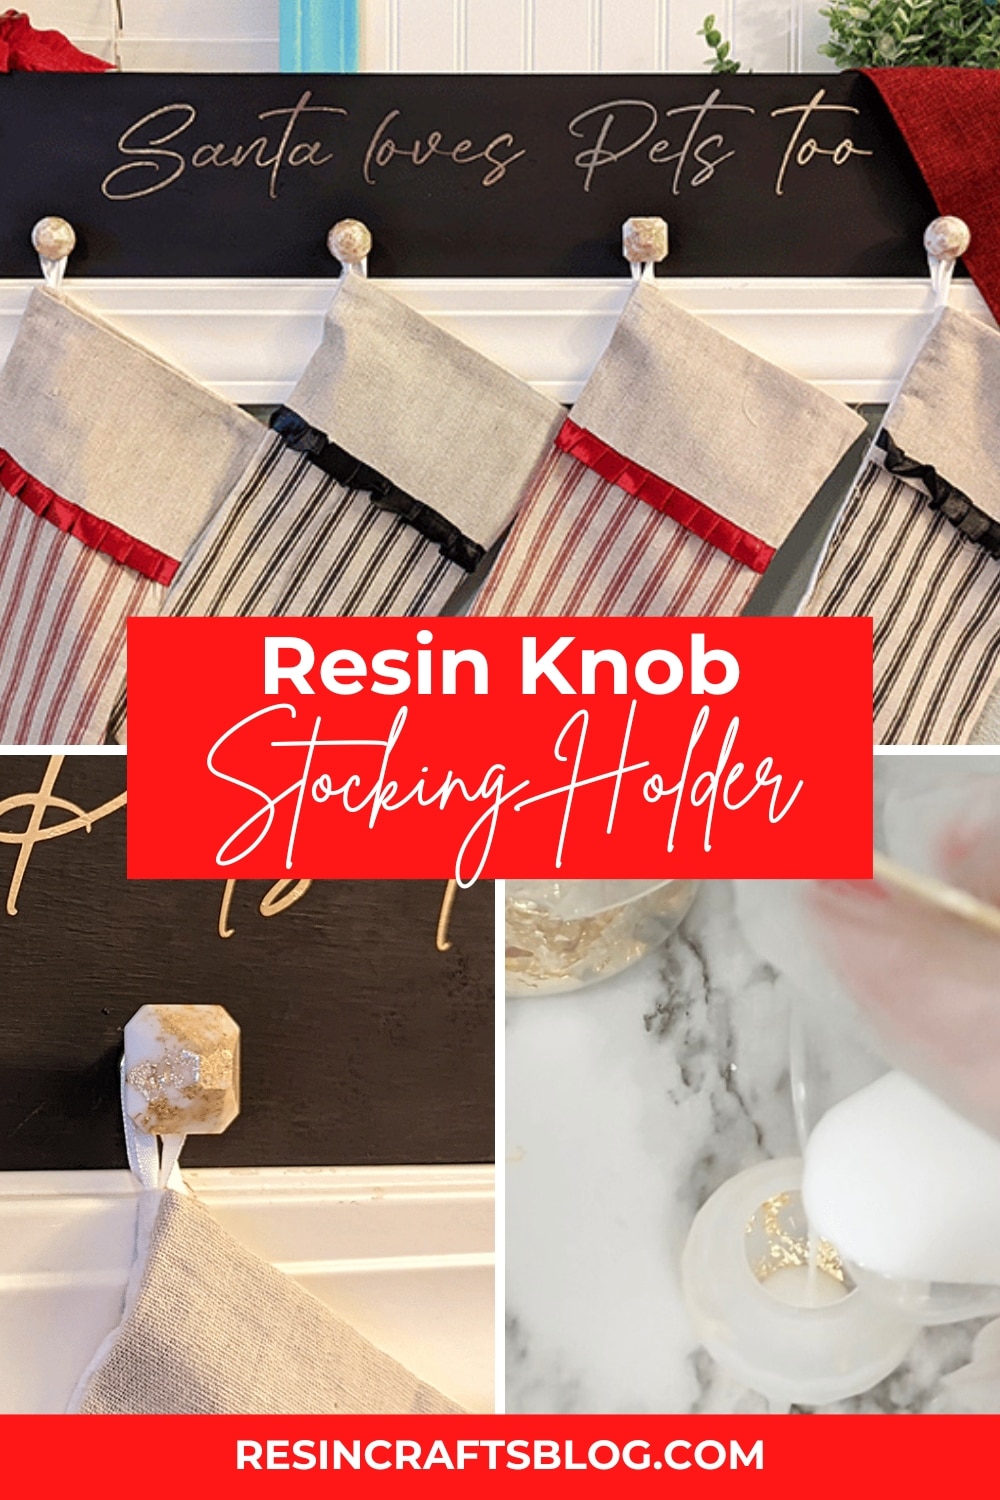 Need a place to hang stockings because you don't have a mantel? Make a DIY resin knob stocking holder like this one! via @resincraftsblog